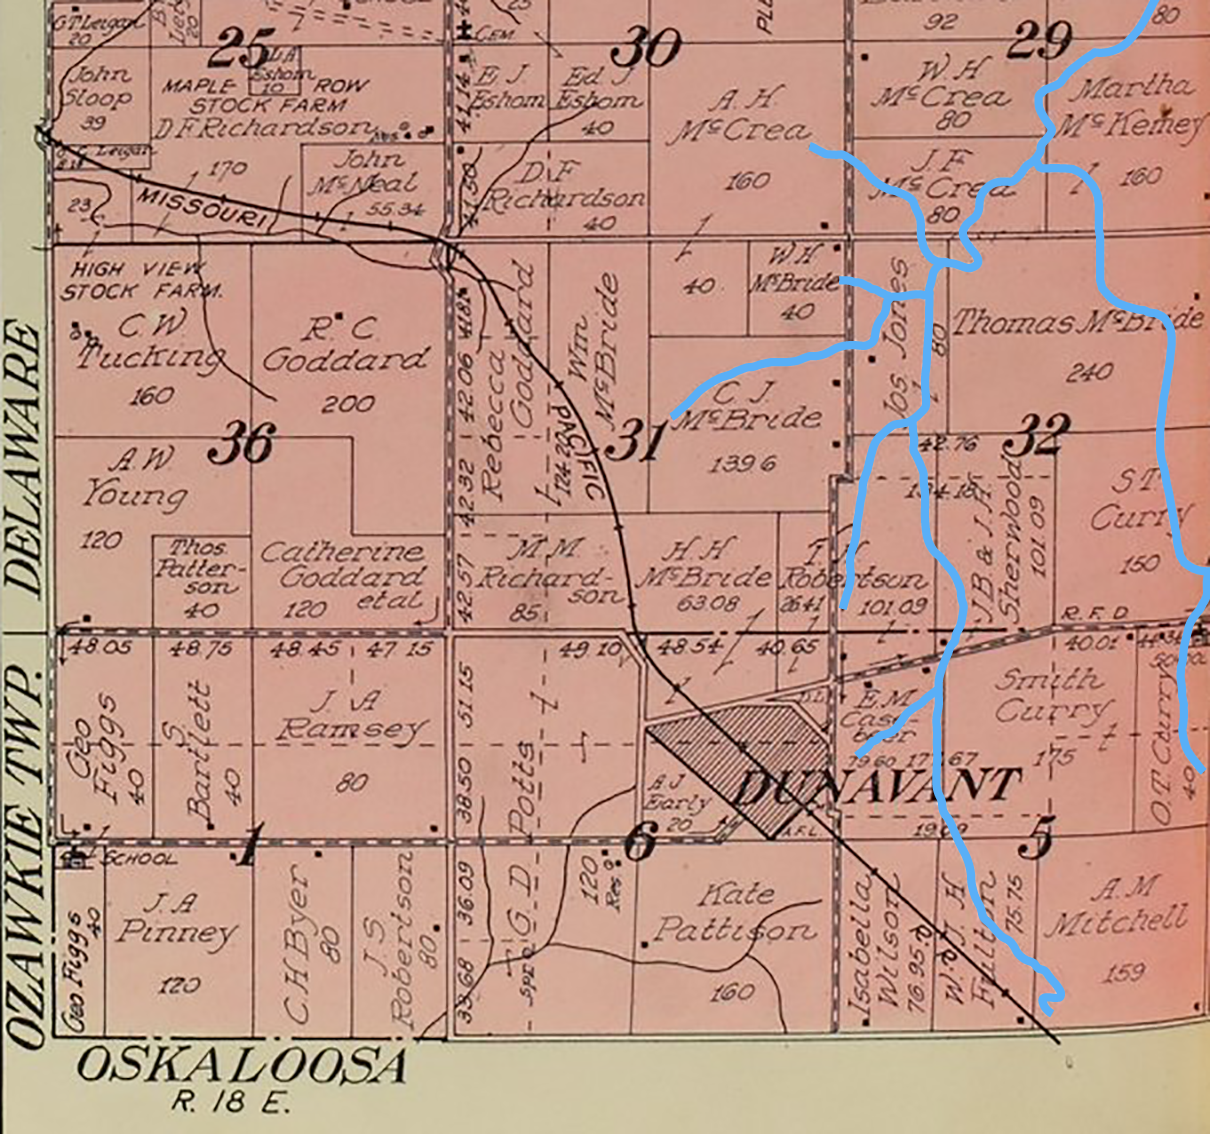 Detail of fig. 1, with a branched blue line indicating the path of a creek.